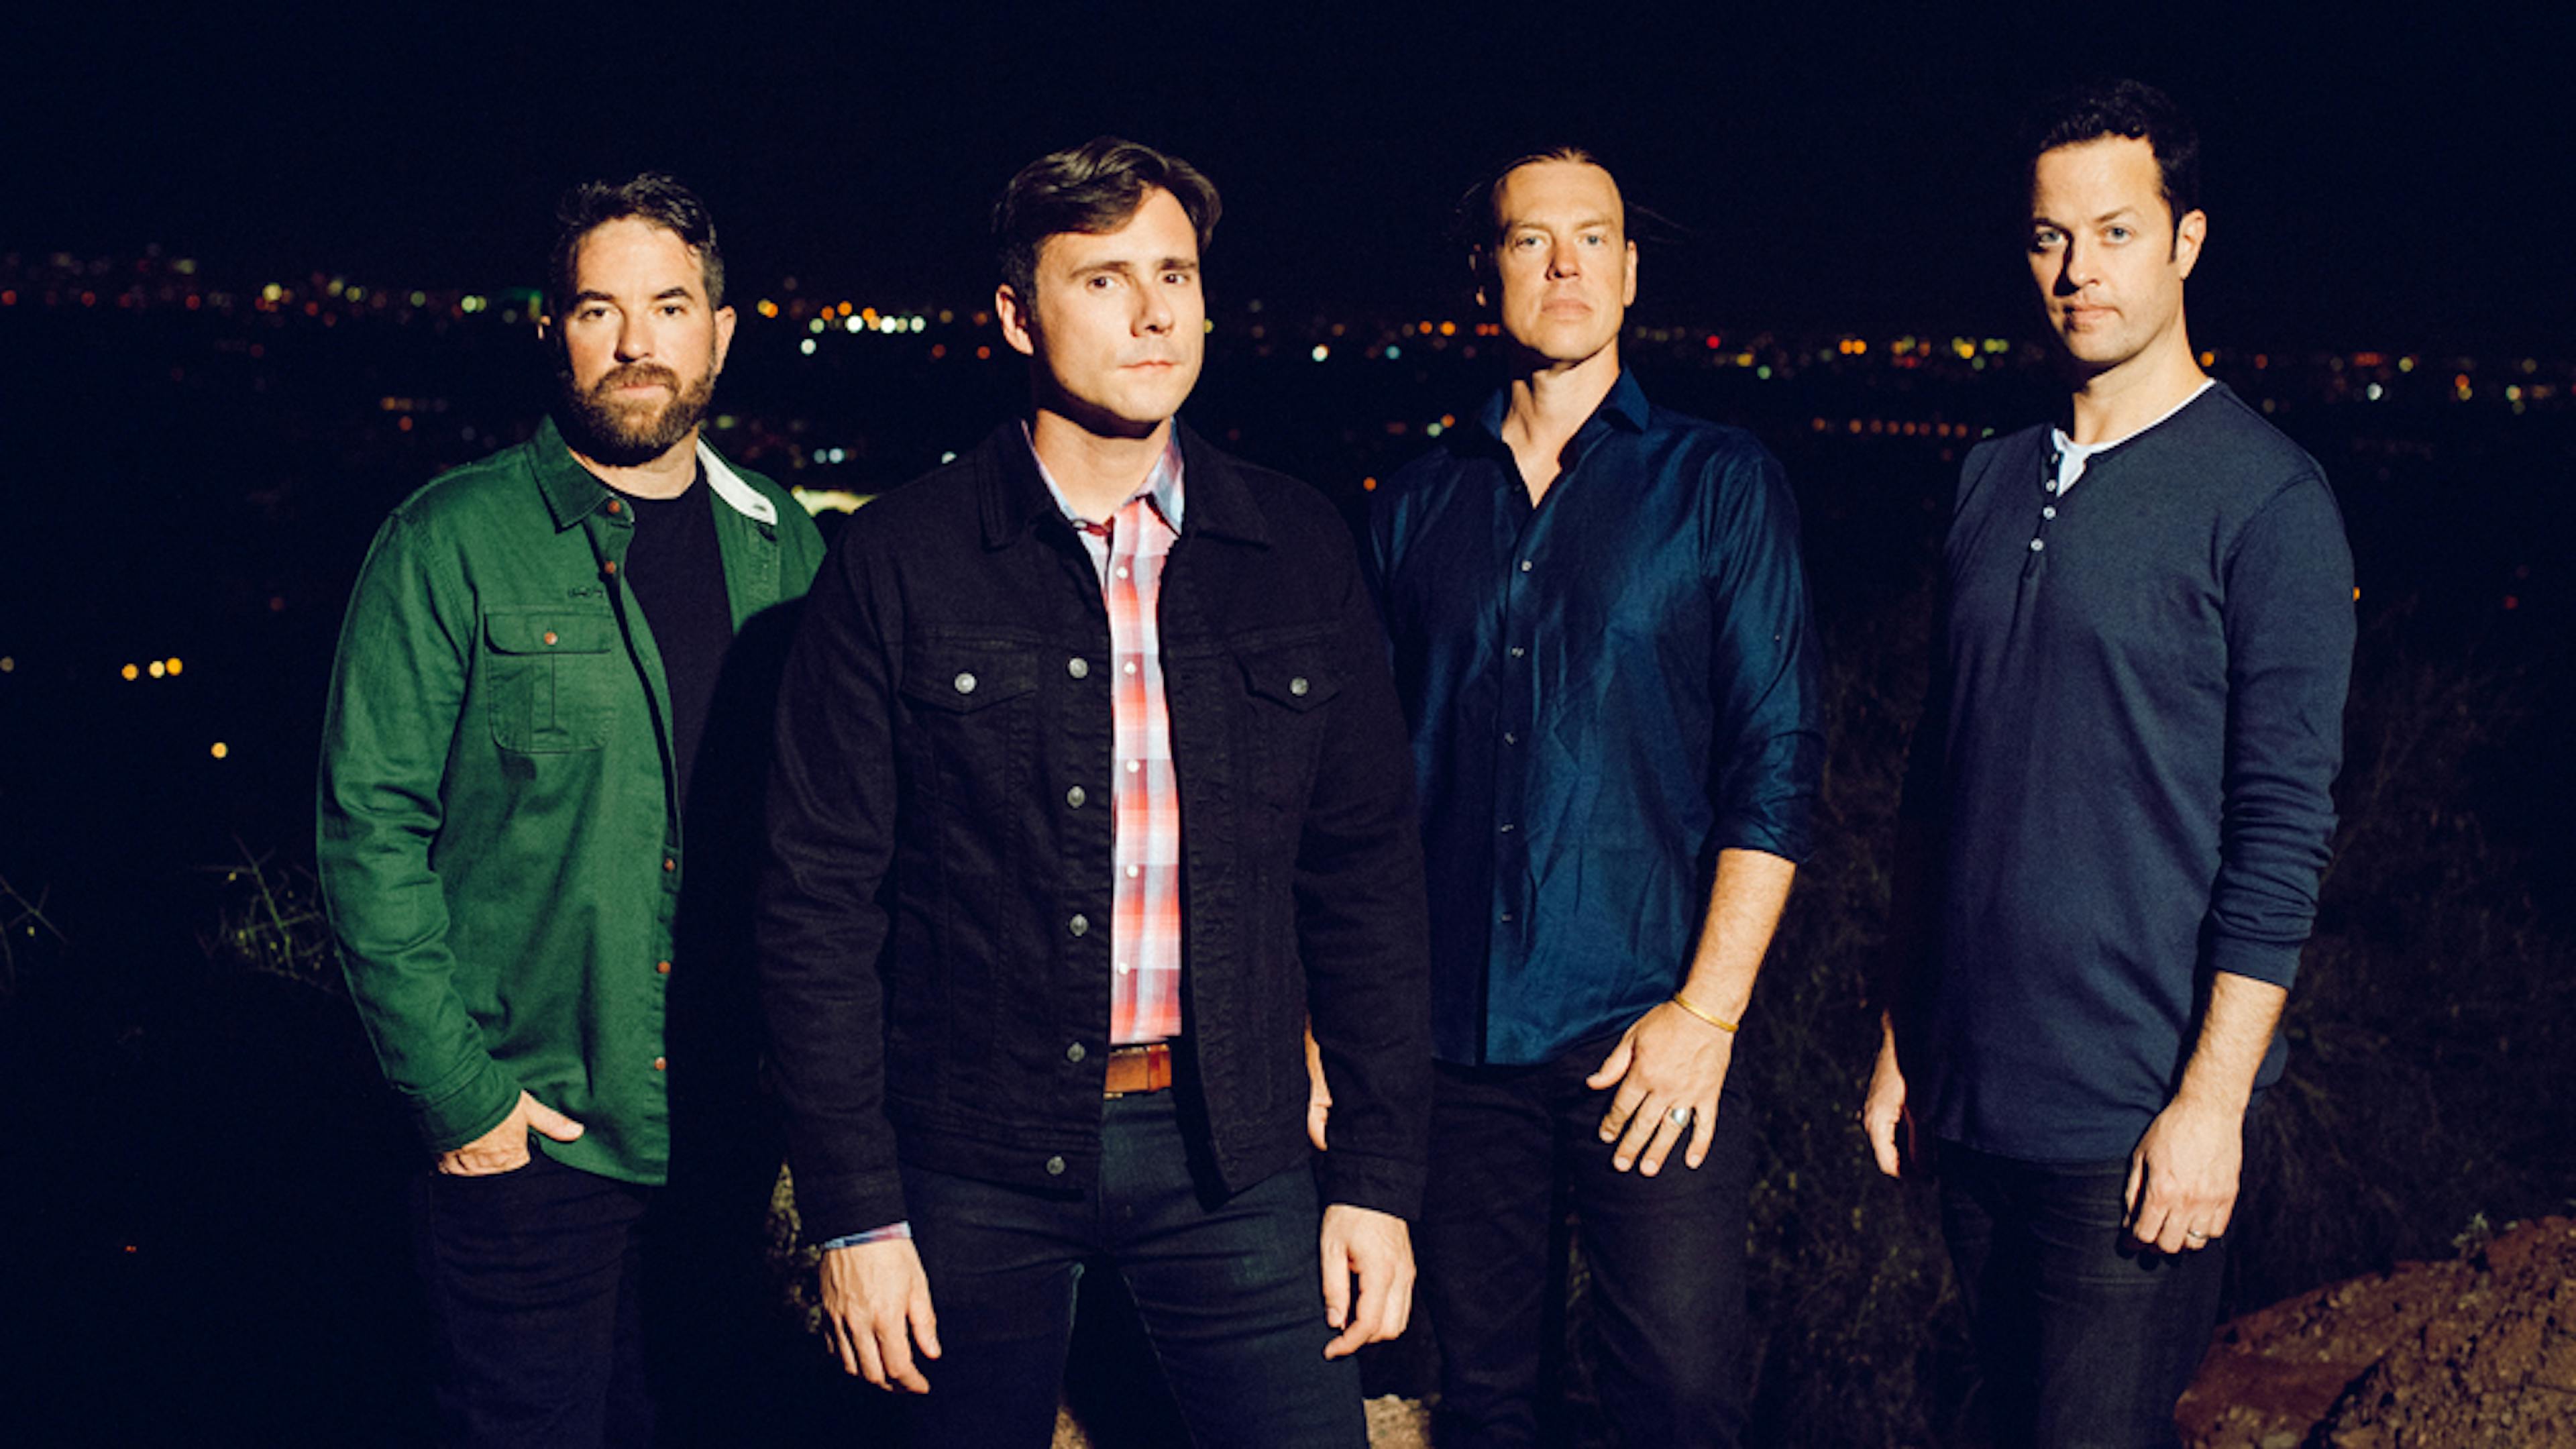 Jimmy Eat World Have Announced Their New Album, Surviving